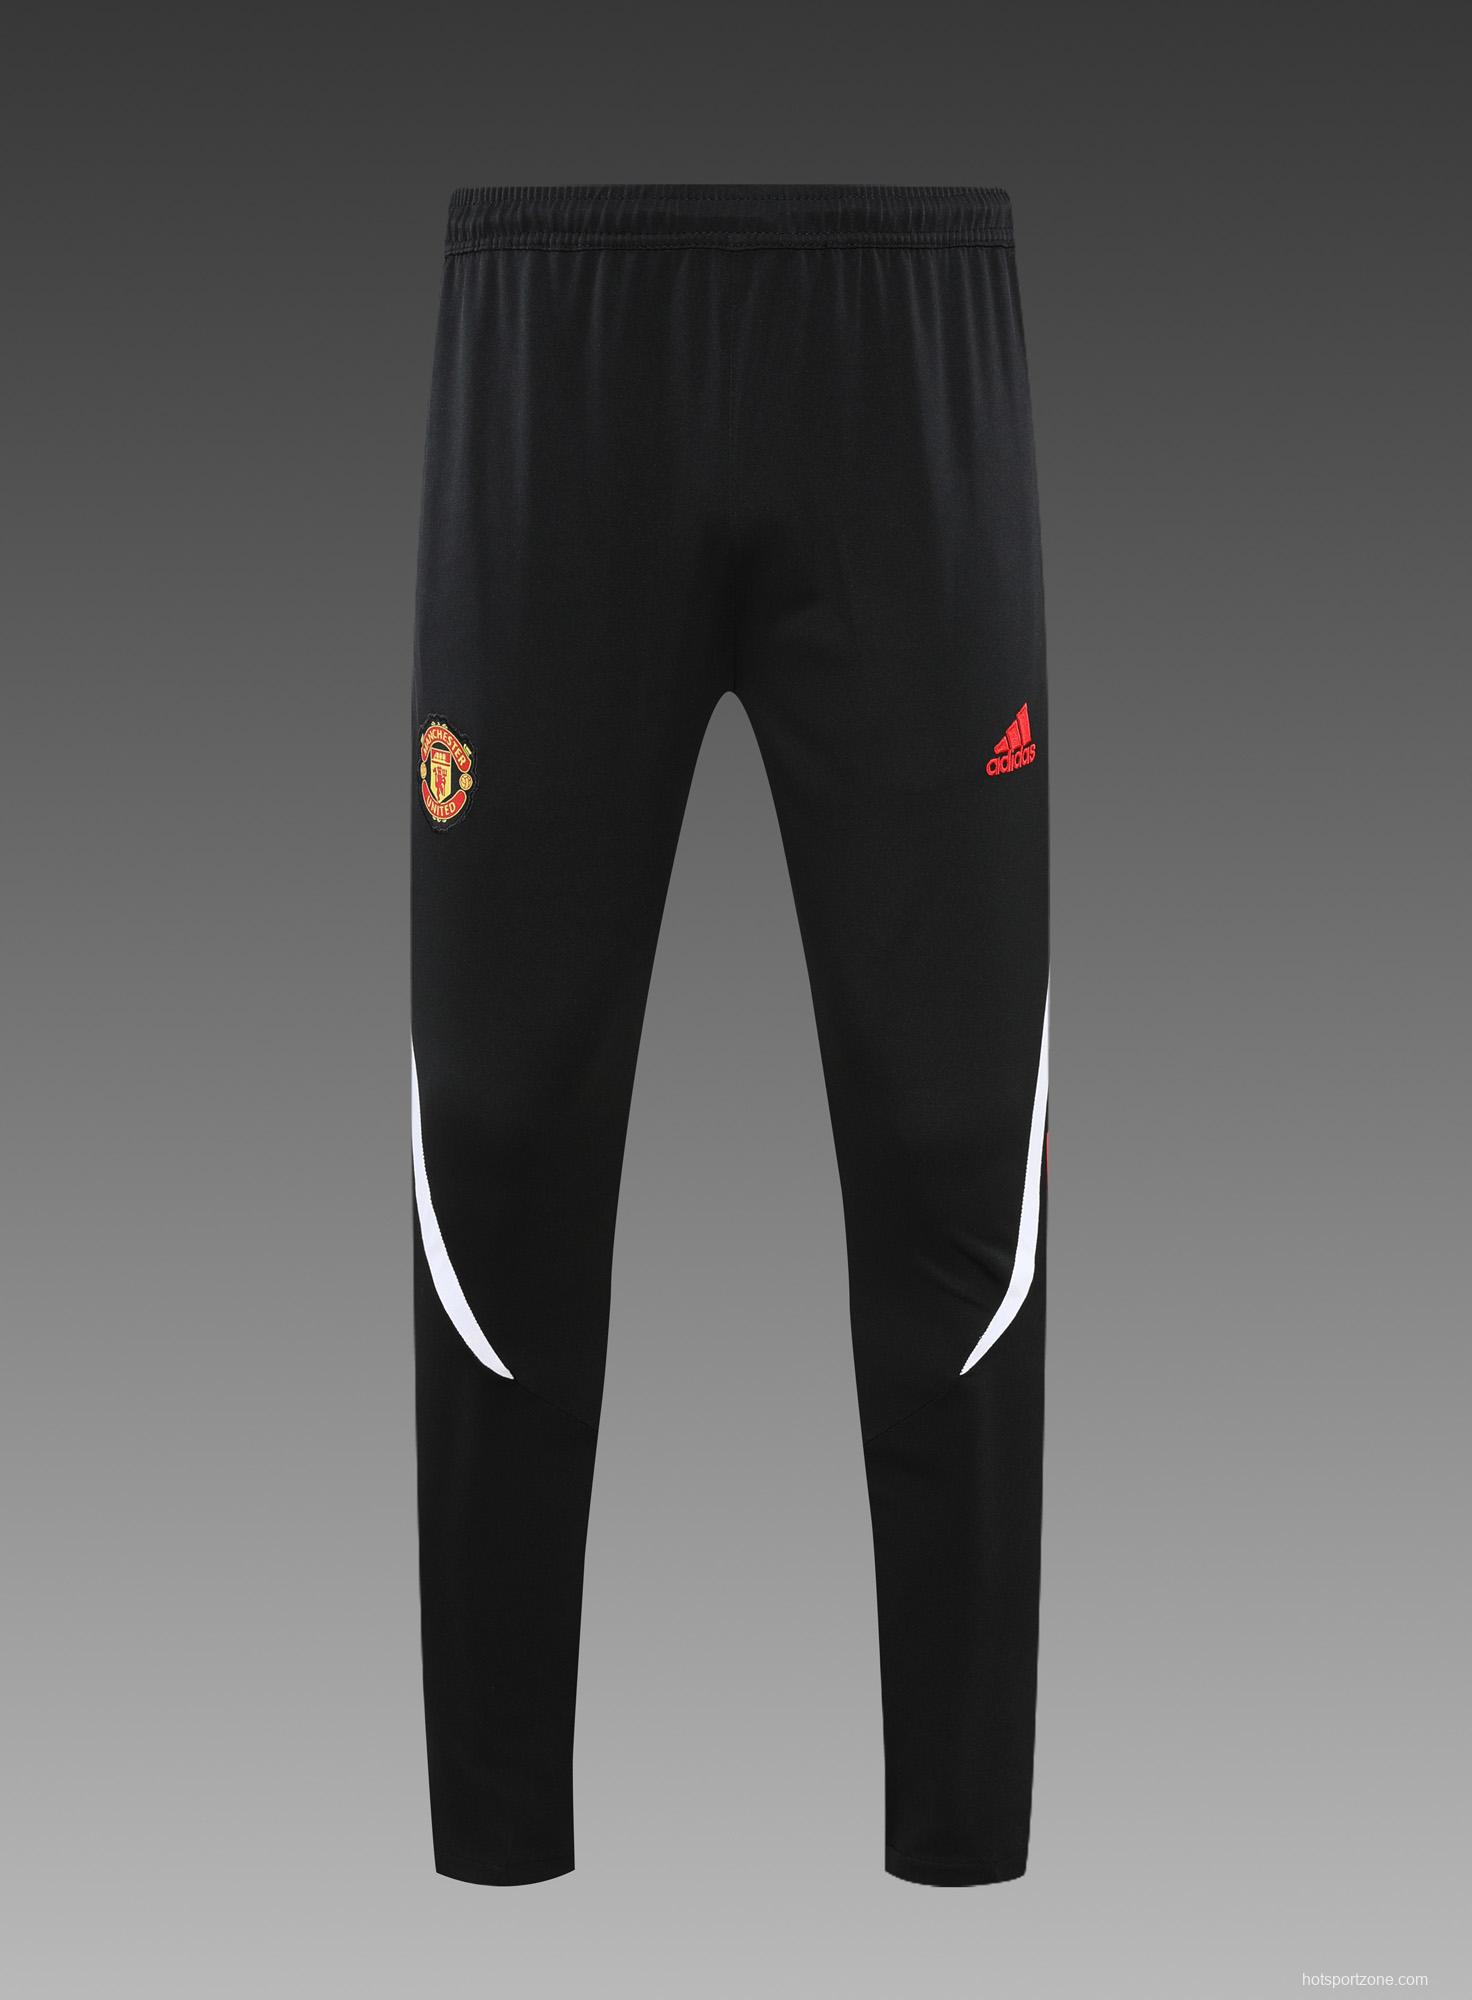 Manchester United POLO kit black (not sold separately)